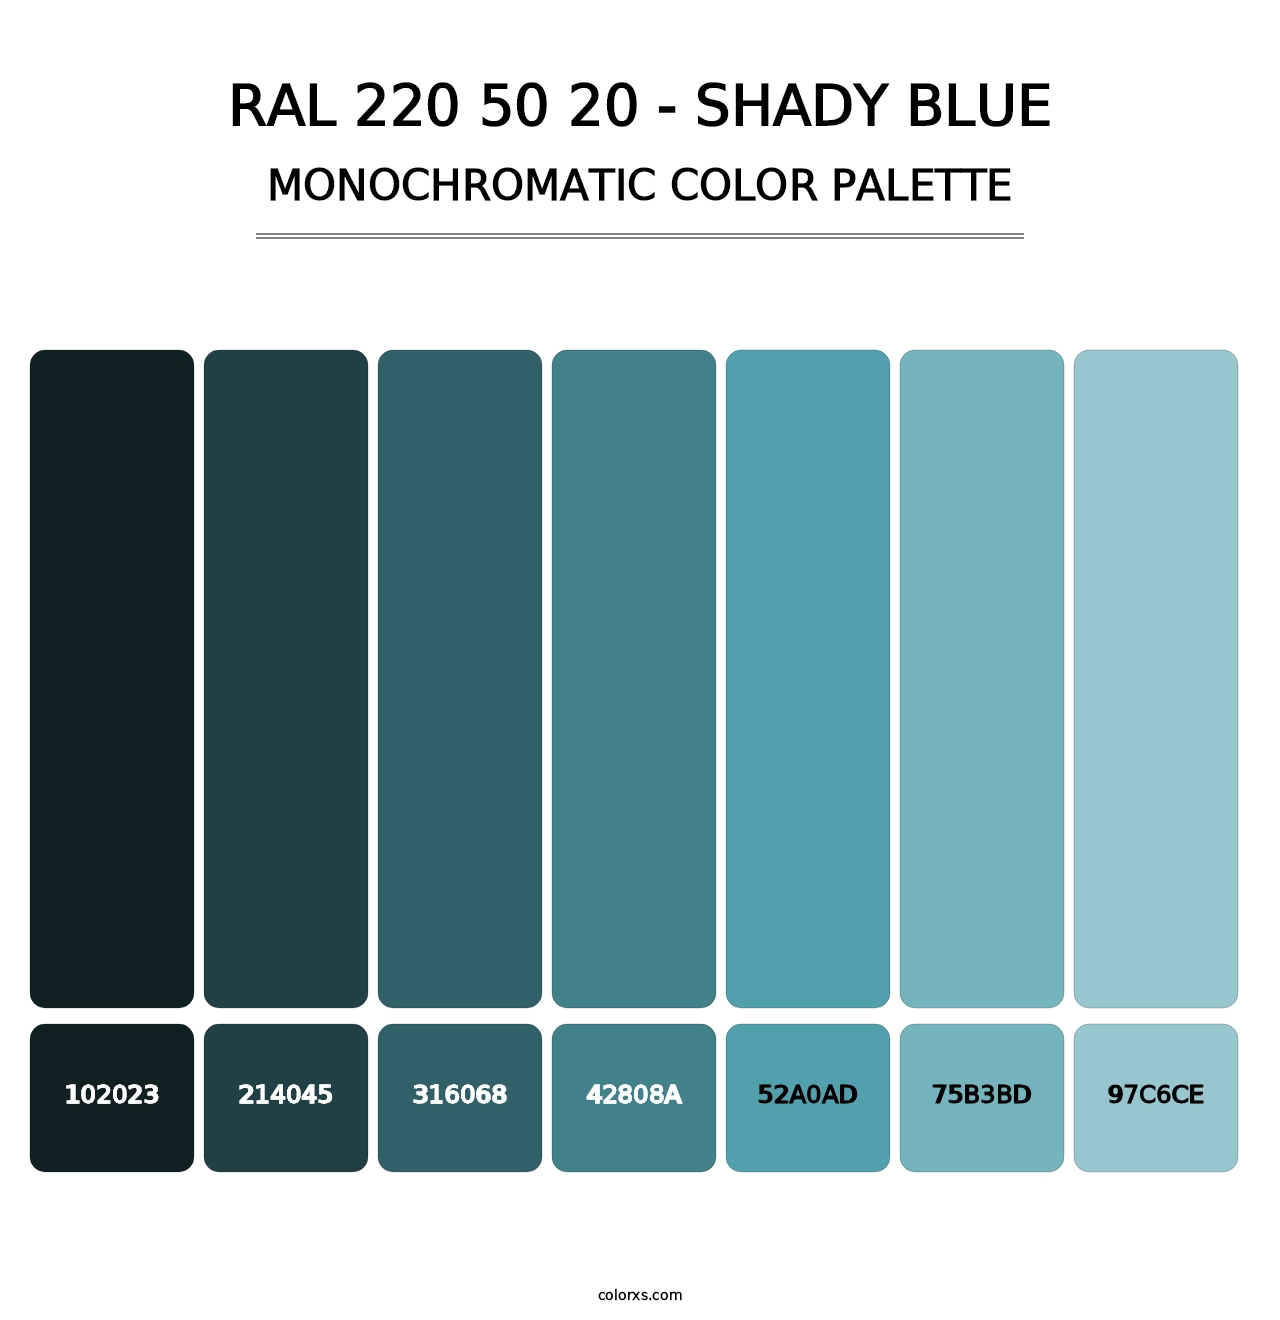 RAL 220 50 20 - Shady Blue - Monochromatic Color Palette